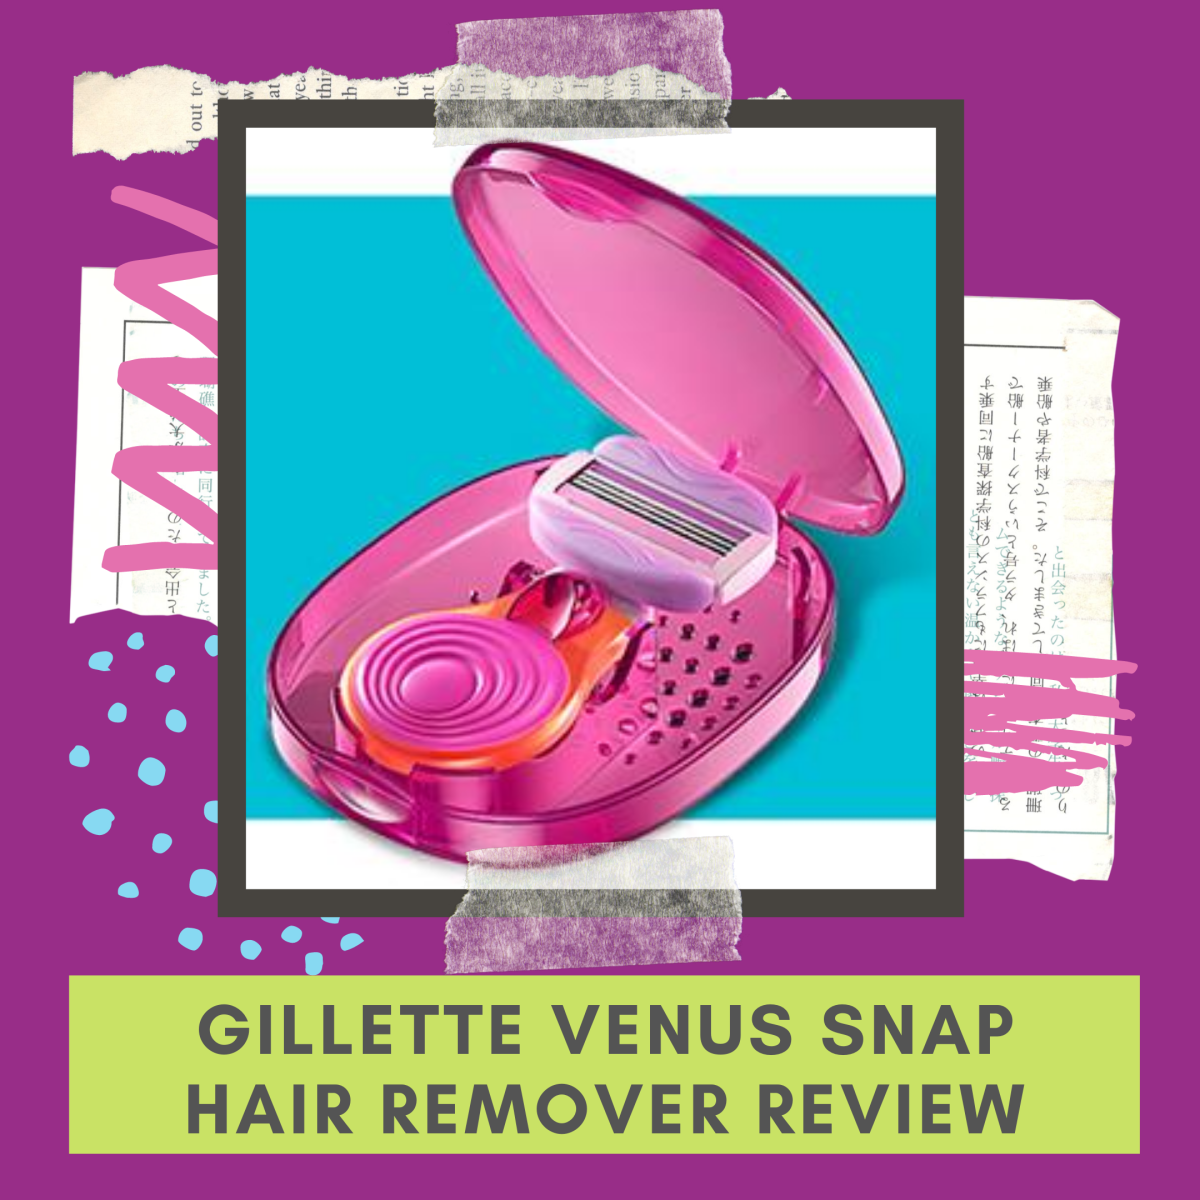 Gillette Venus Snap Hair Remover for Women Review